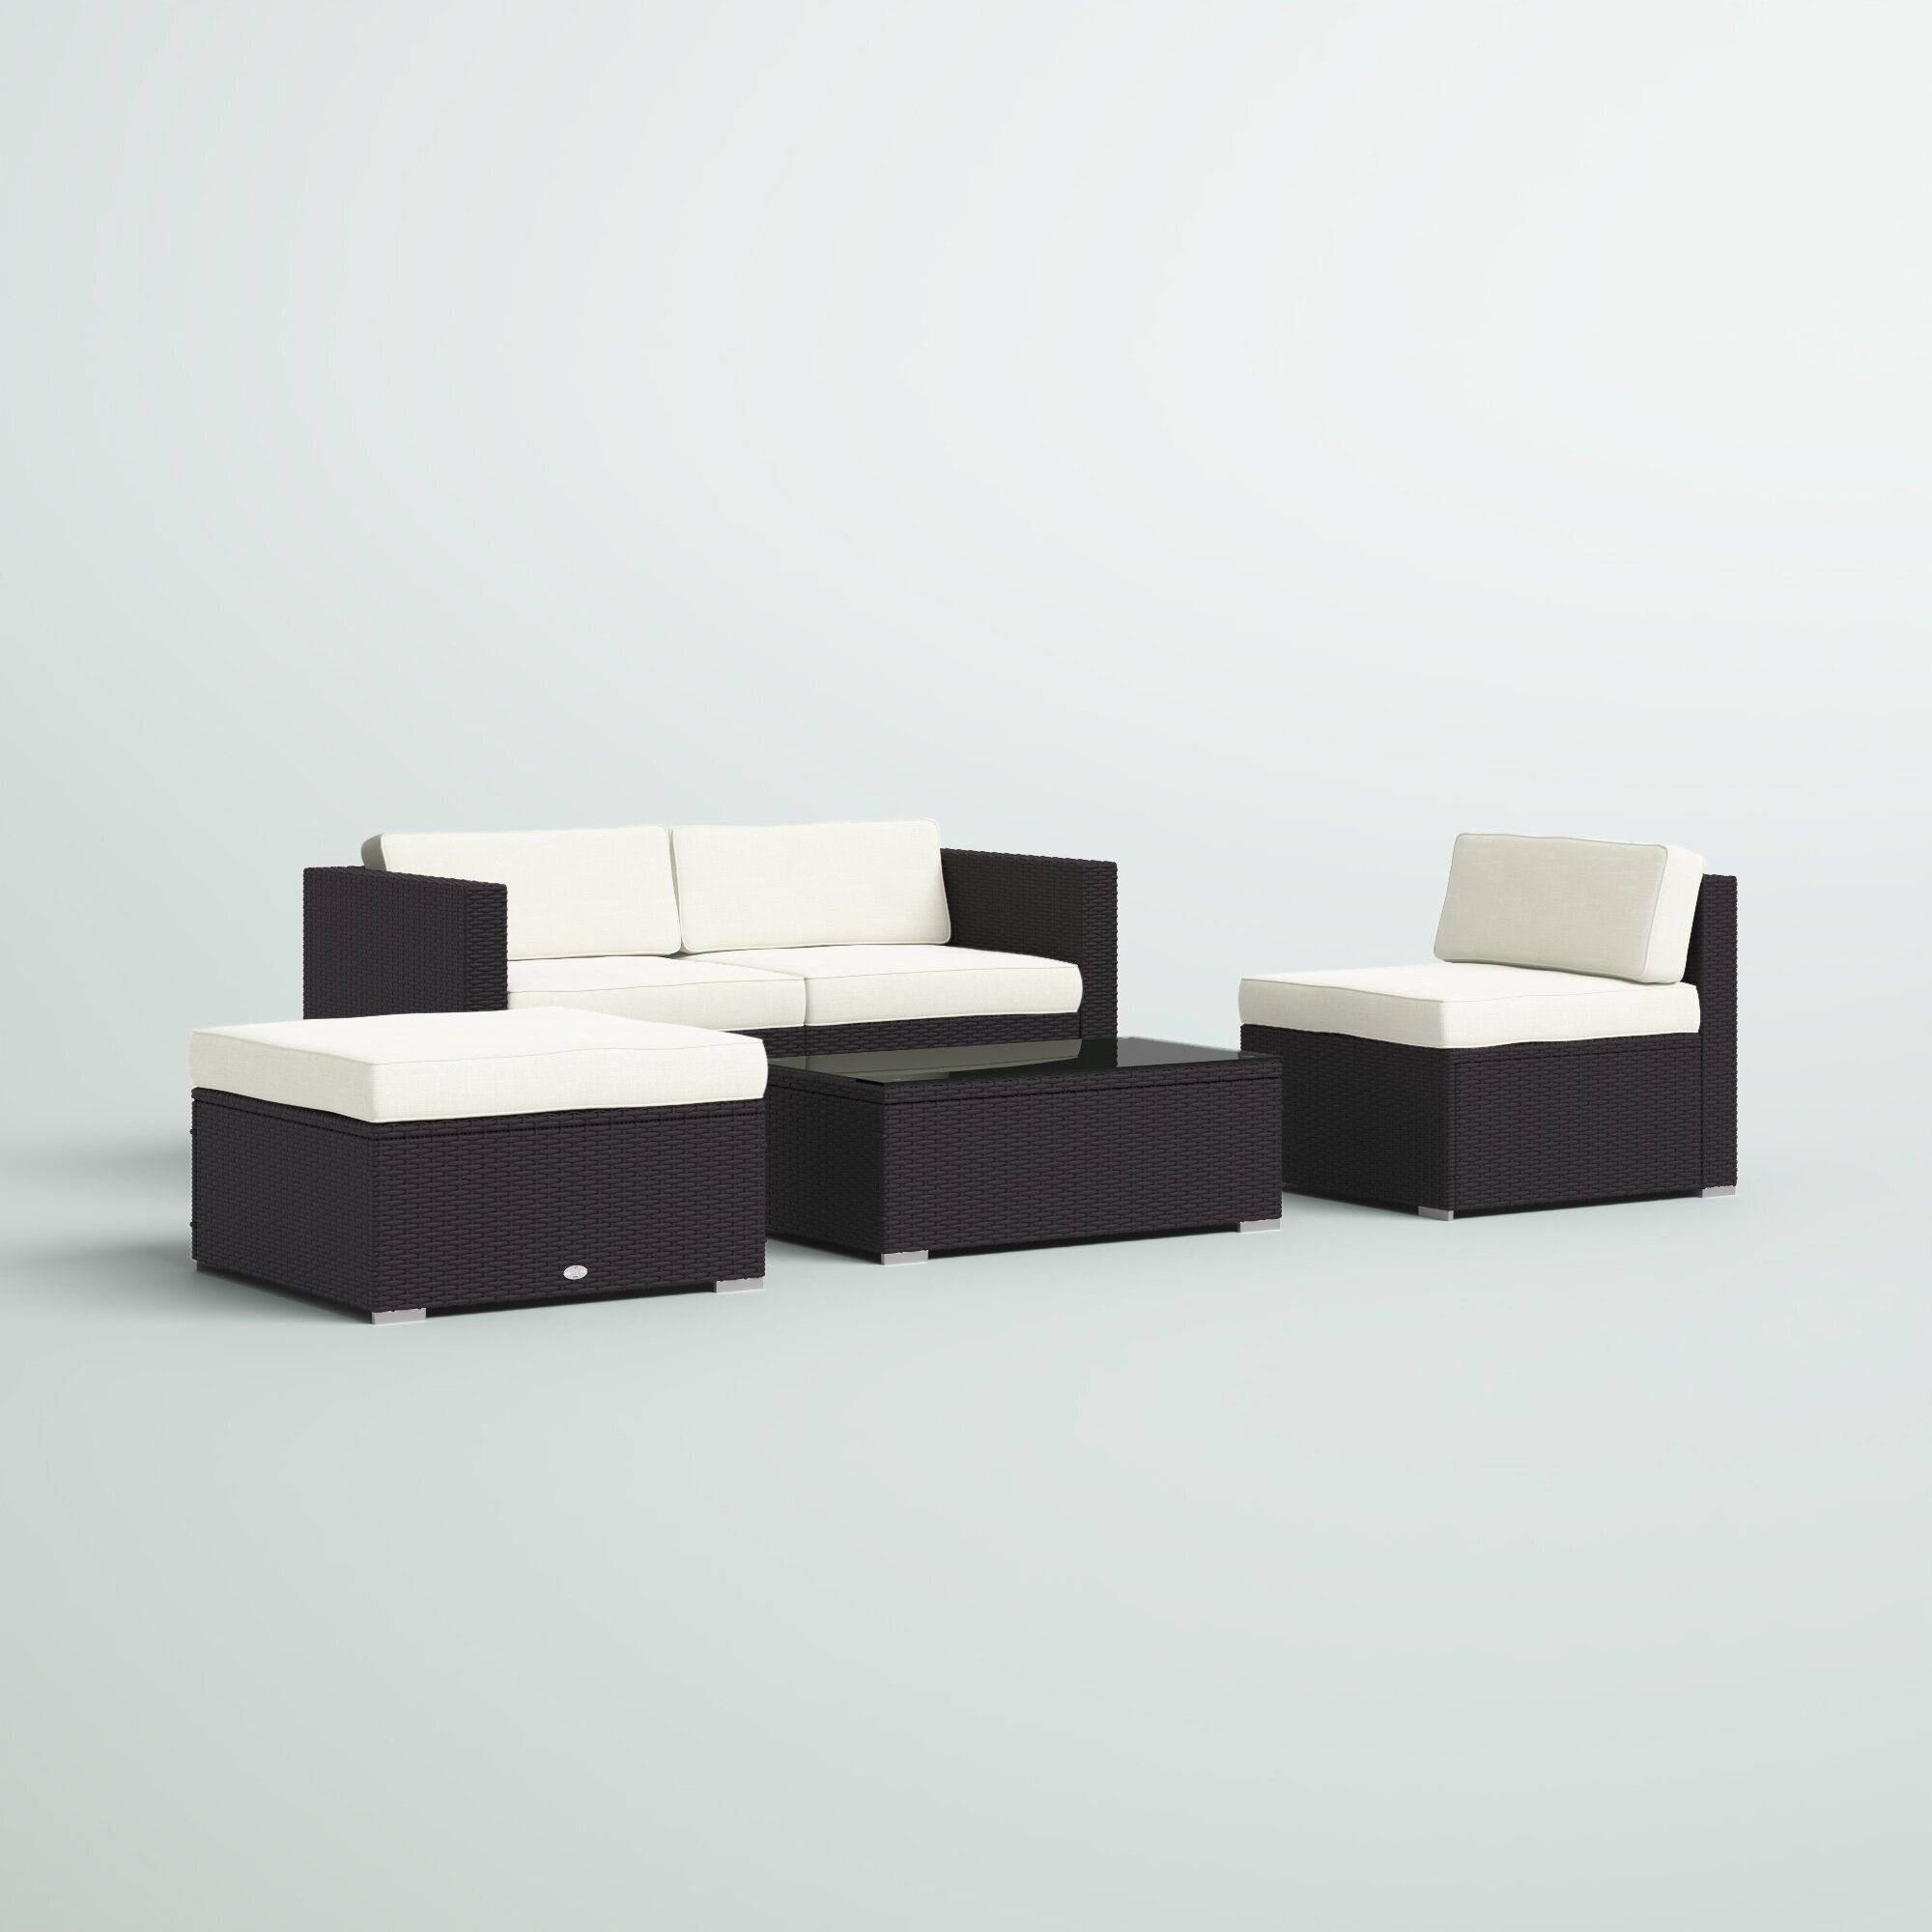 Hazen 4-Person Outdoor Seating Group with Cushions